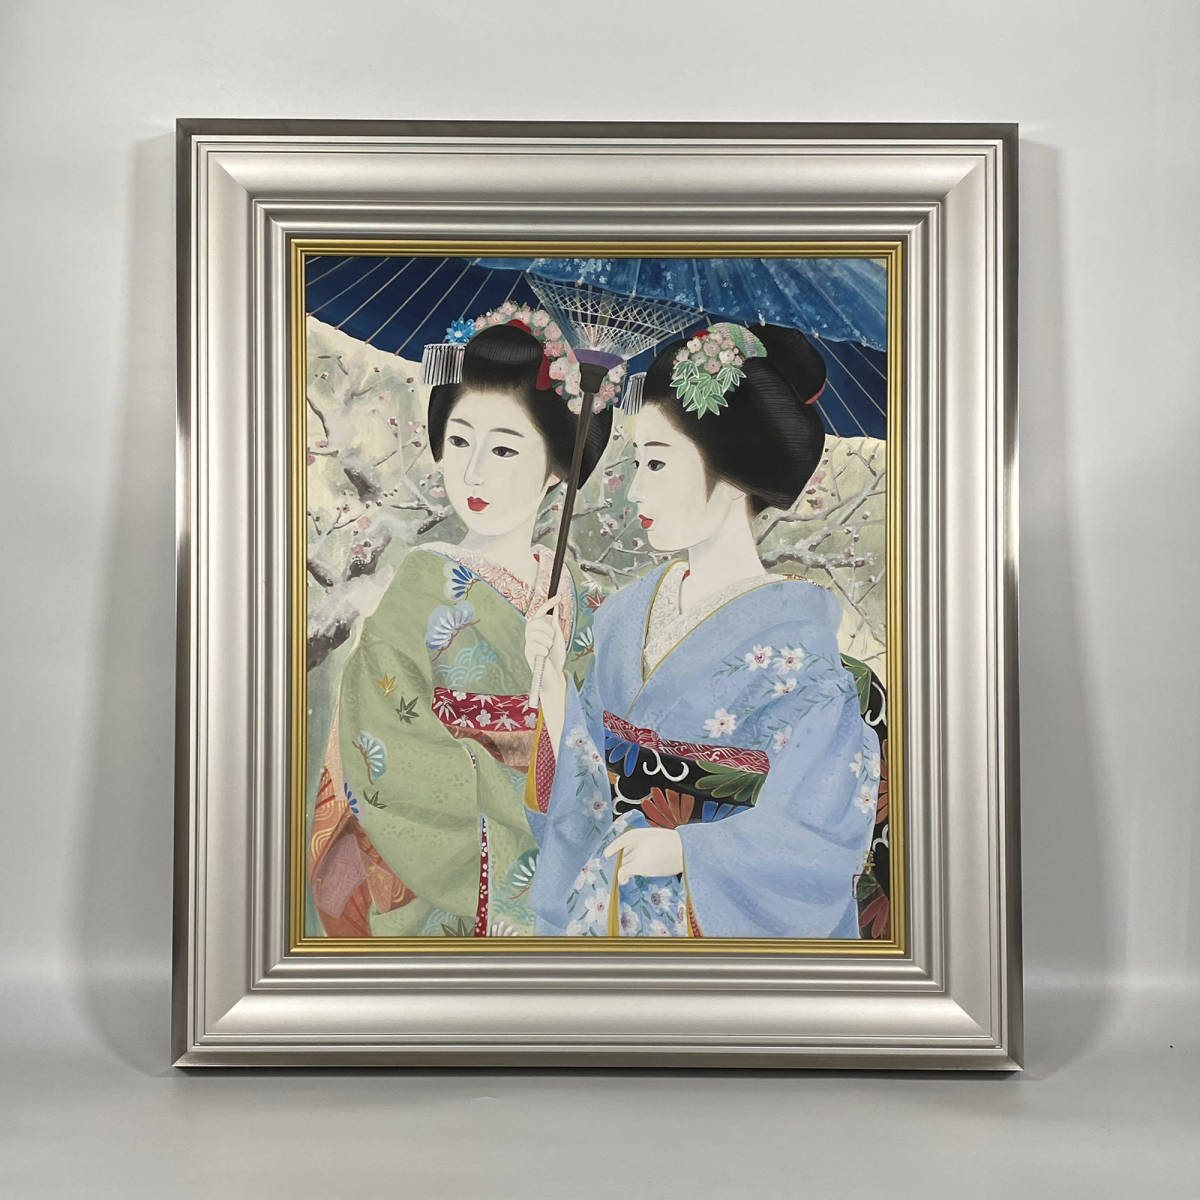 [Authentic] ■ Jun Nakao ■ Awayuki Japanese painting/10 size with seal/Authentic guaranteed 230921004, Painting, Japanese painting, person, Bodhisattva